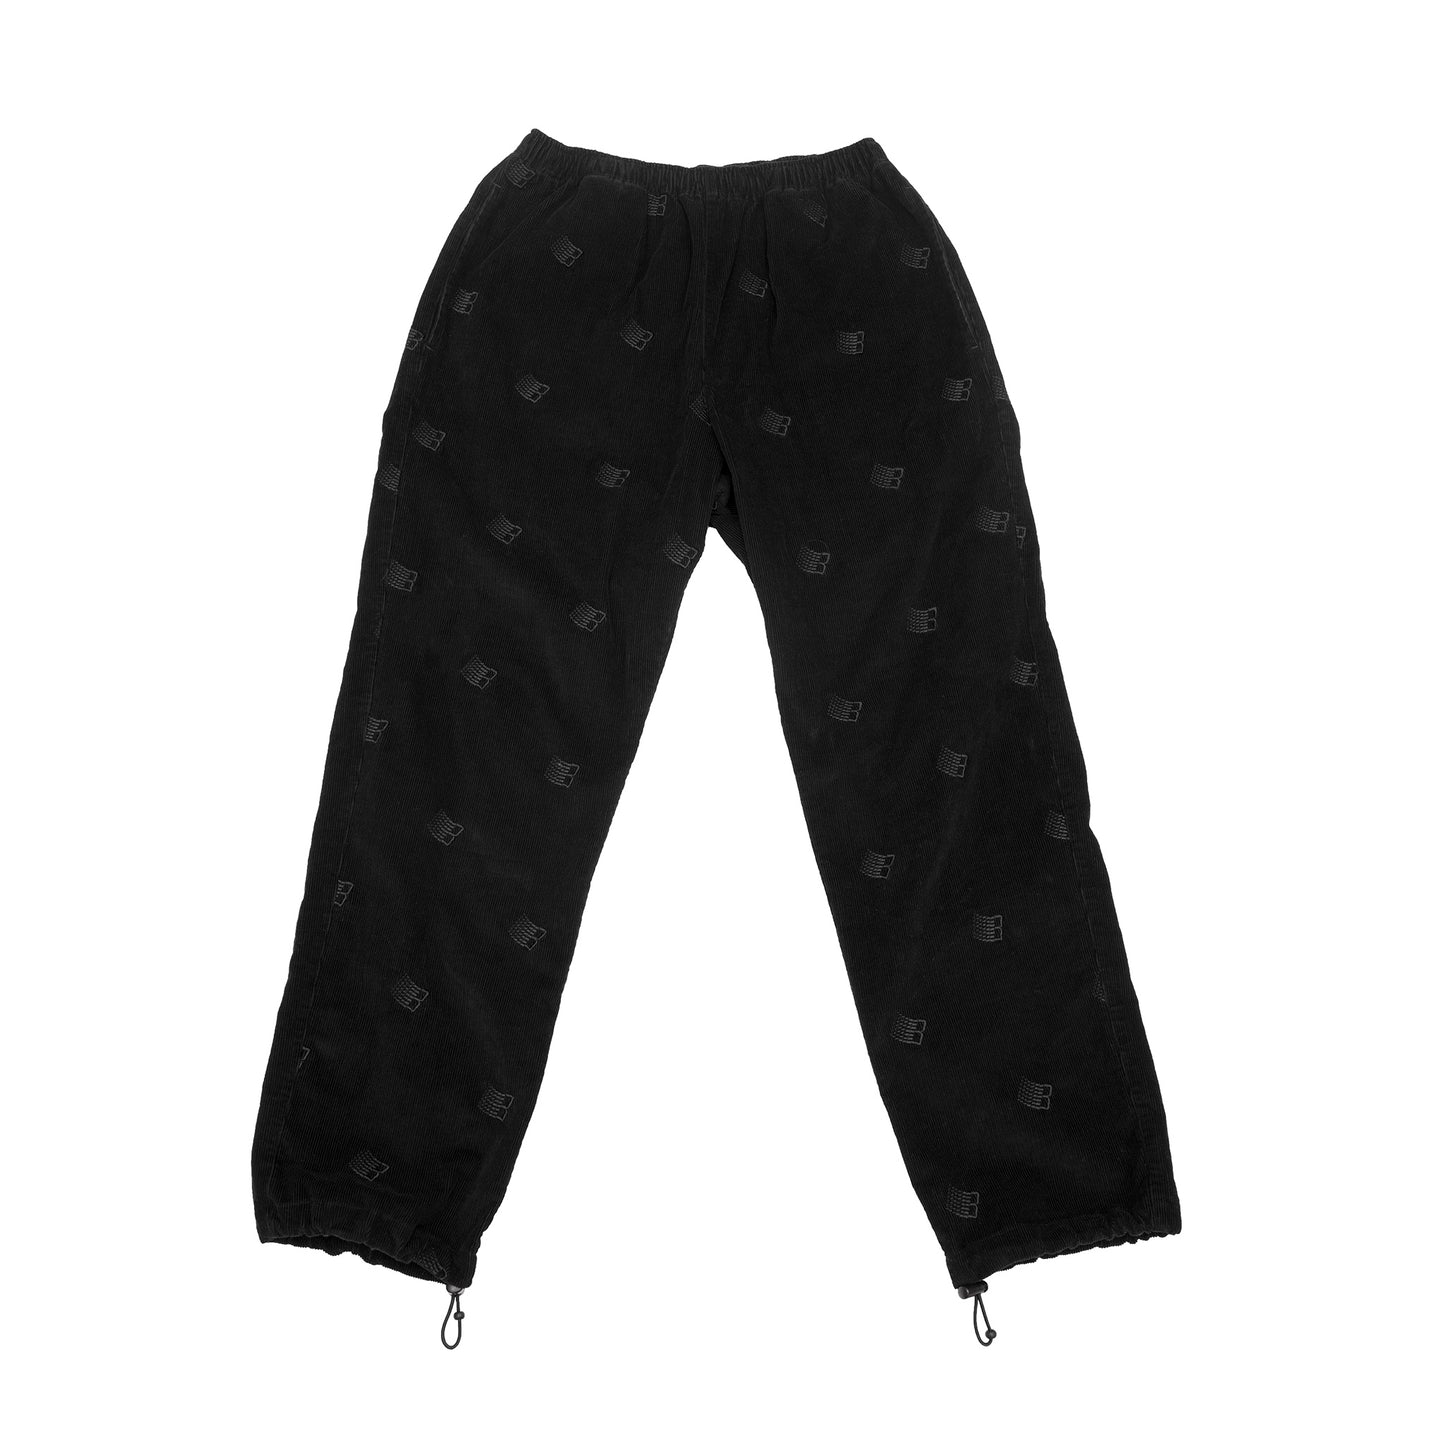 EMBROIDERED SYNCH CORDS BLACK